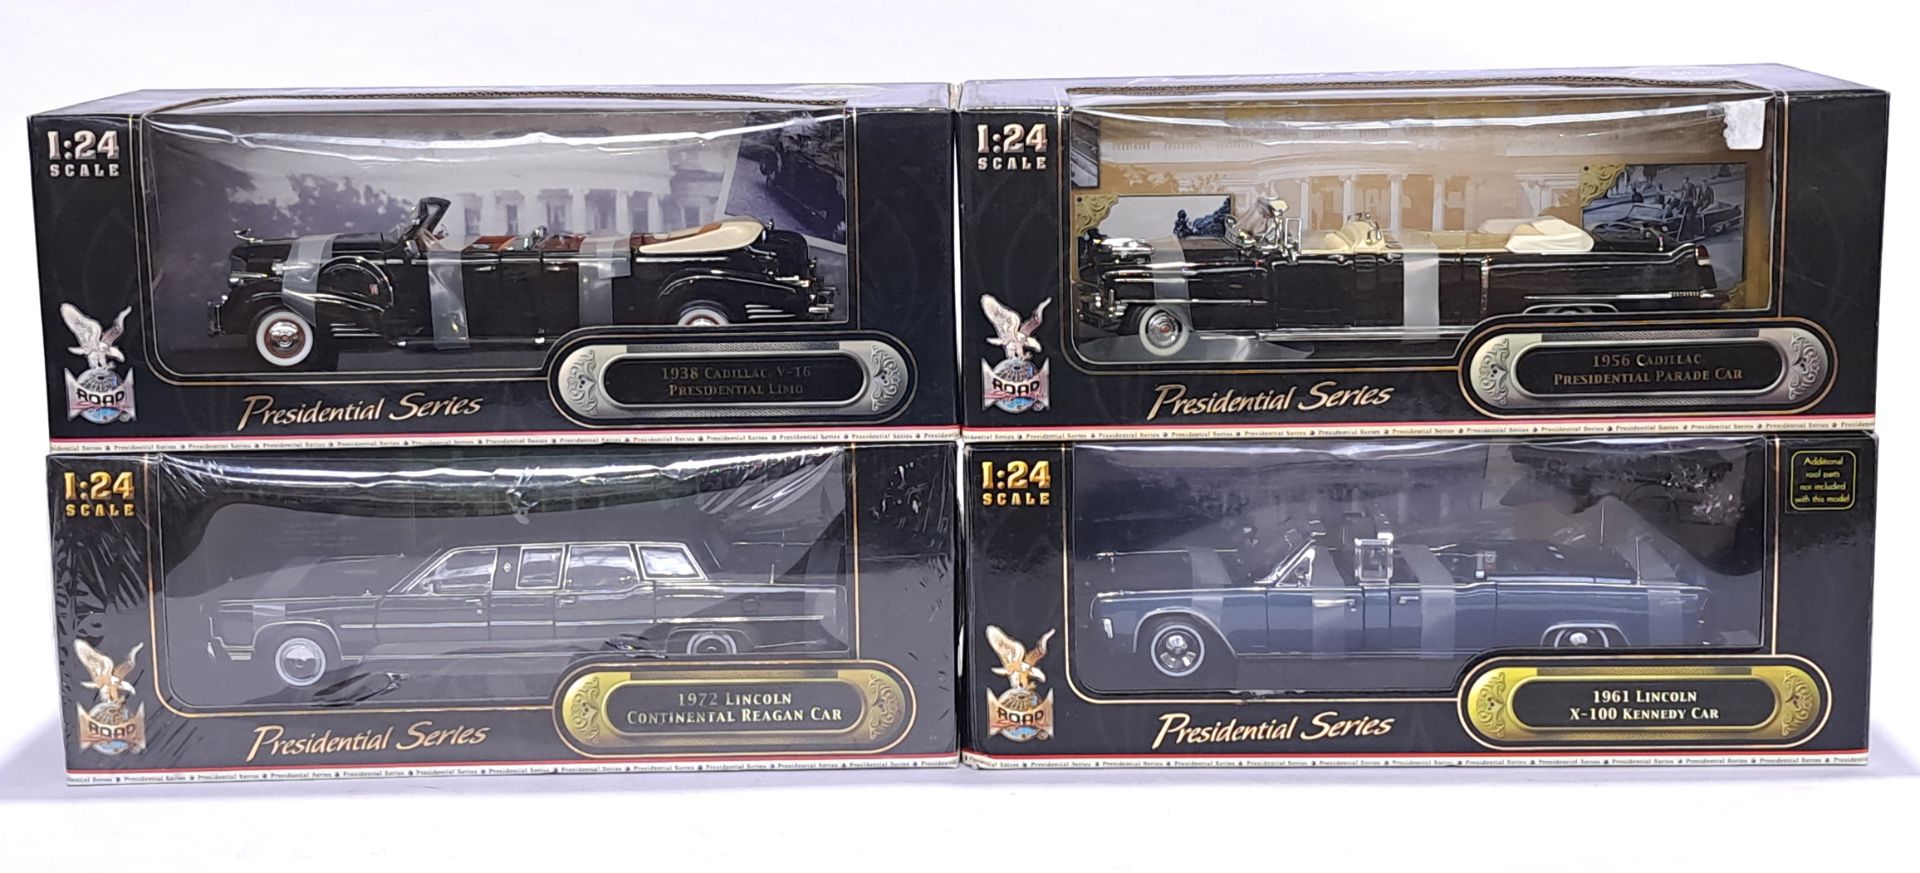 Road Signature (Yat Ming) Presidential Series, a 1:24 scale boxed group